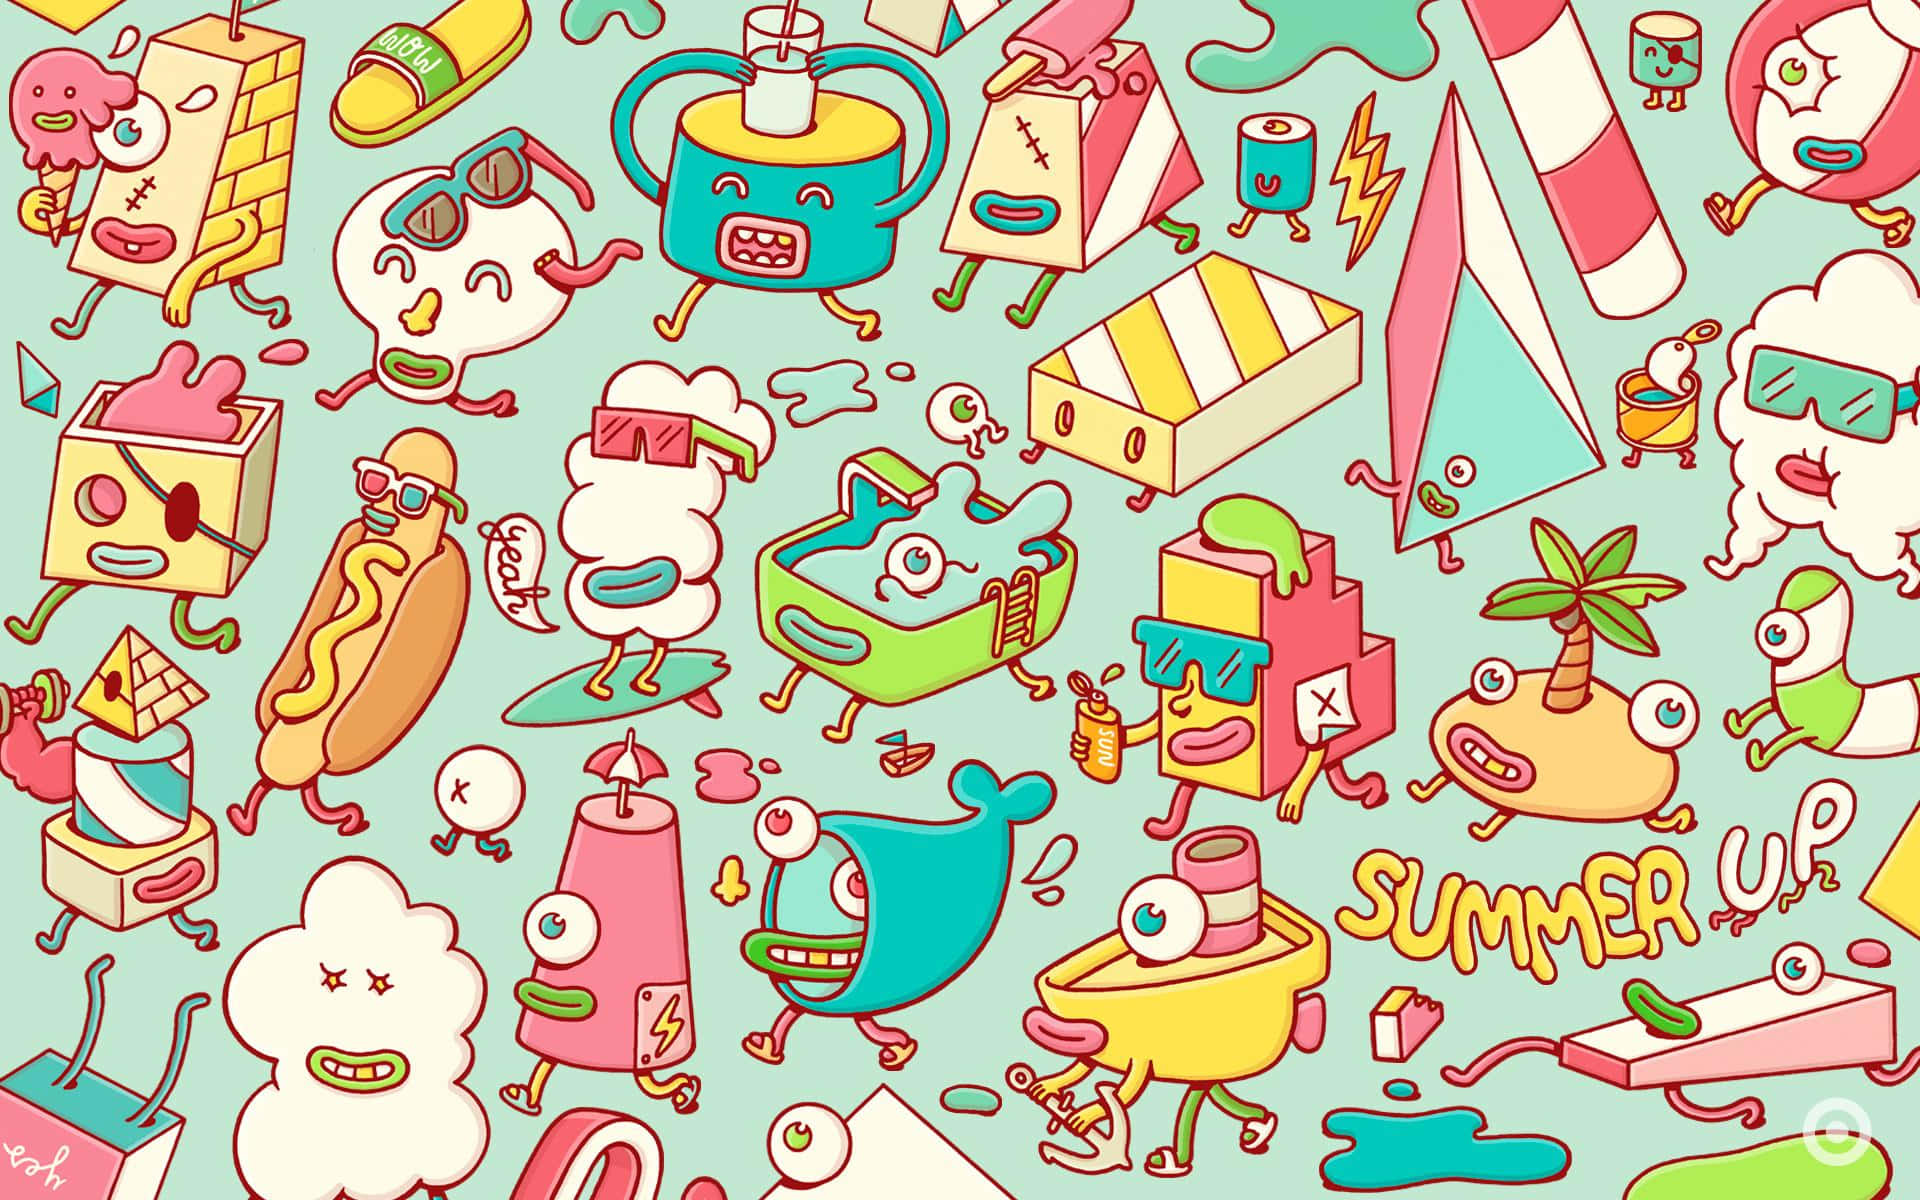 Life is Kawaii with This Vibrant Pastel Laptop! Wallpaper